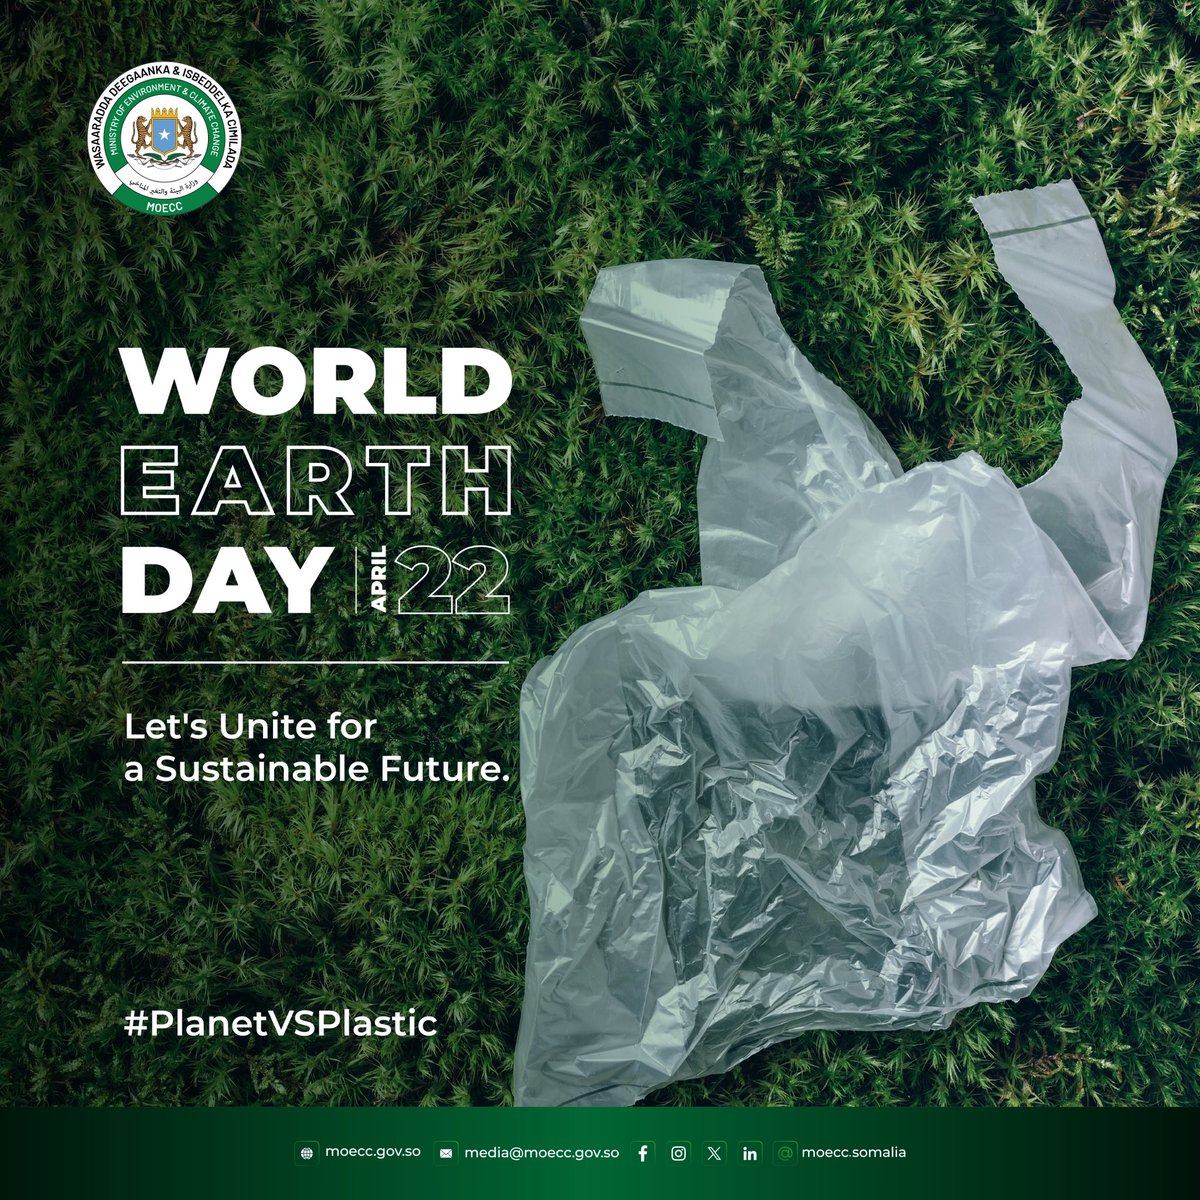 Today, on World Earth Day, let's celebrate the beauty and wonder of our planet. From the rolling hills to the crystal-clear waters, Somalia is blessed with incredible natural diversity. As stewards of this land, it's our responsibility to protect and preserve it. #WorldEarthDay